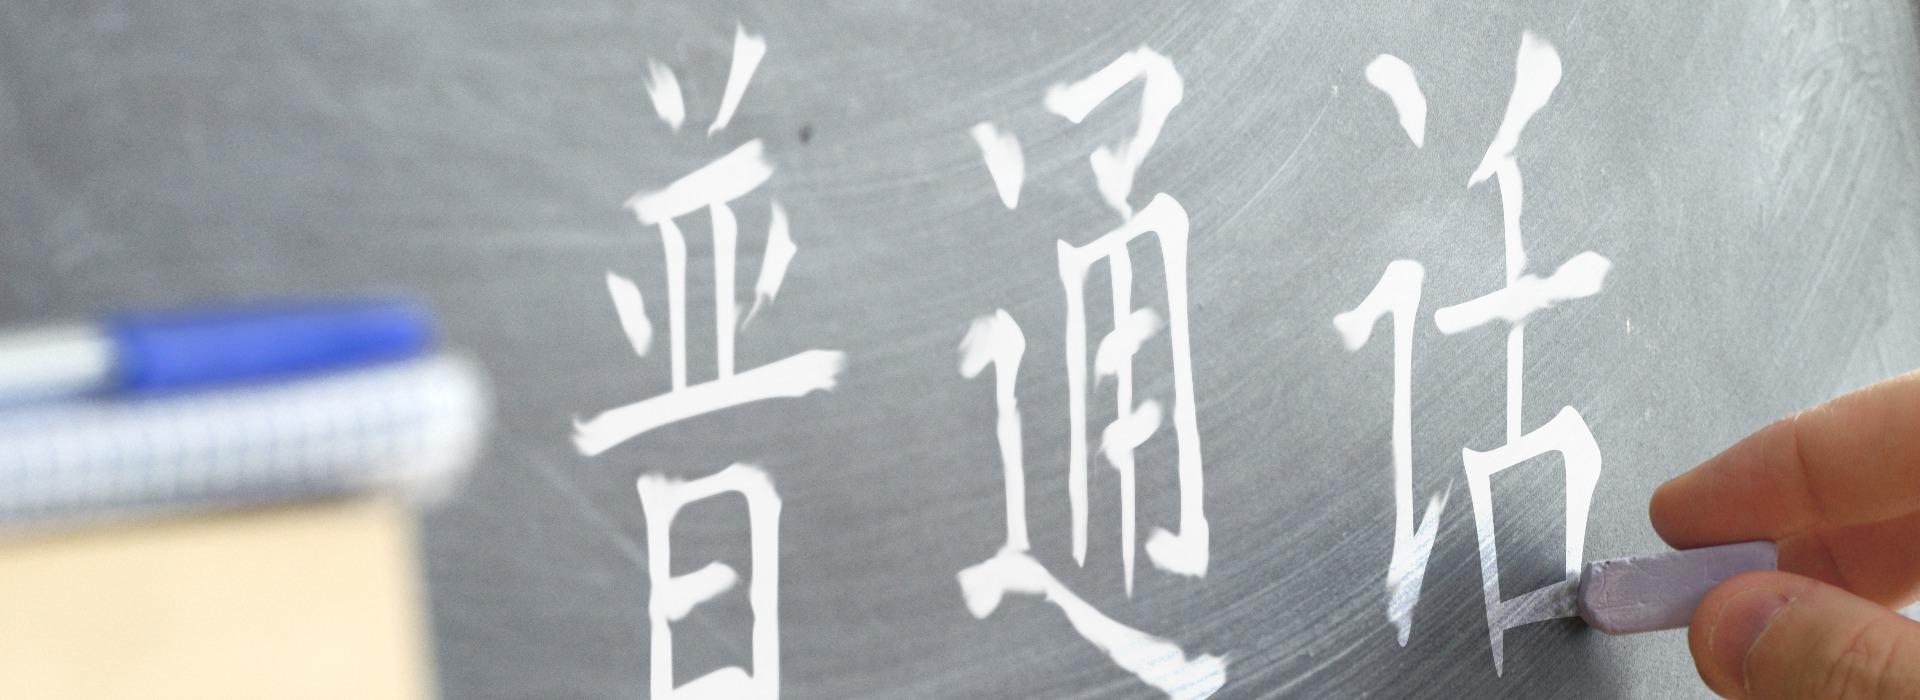 Hand writing on a blackboard in a Chinese class. Some books and school materials.